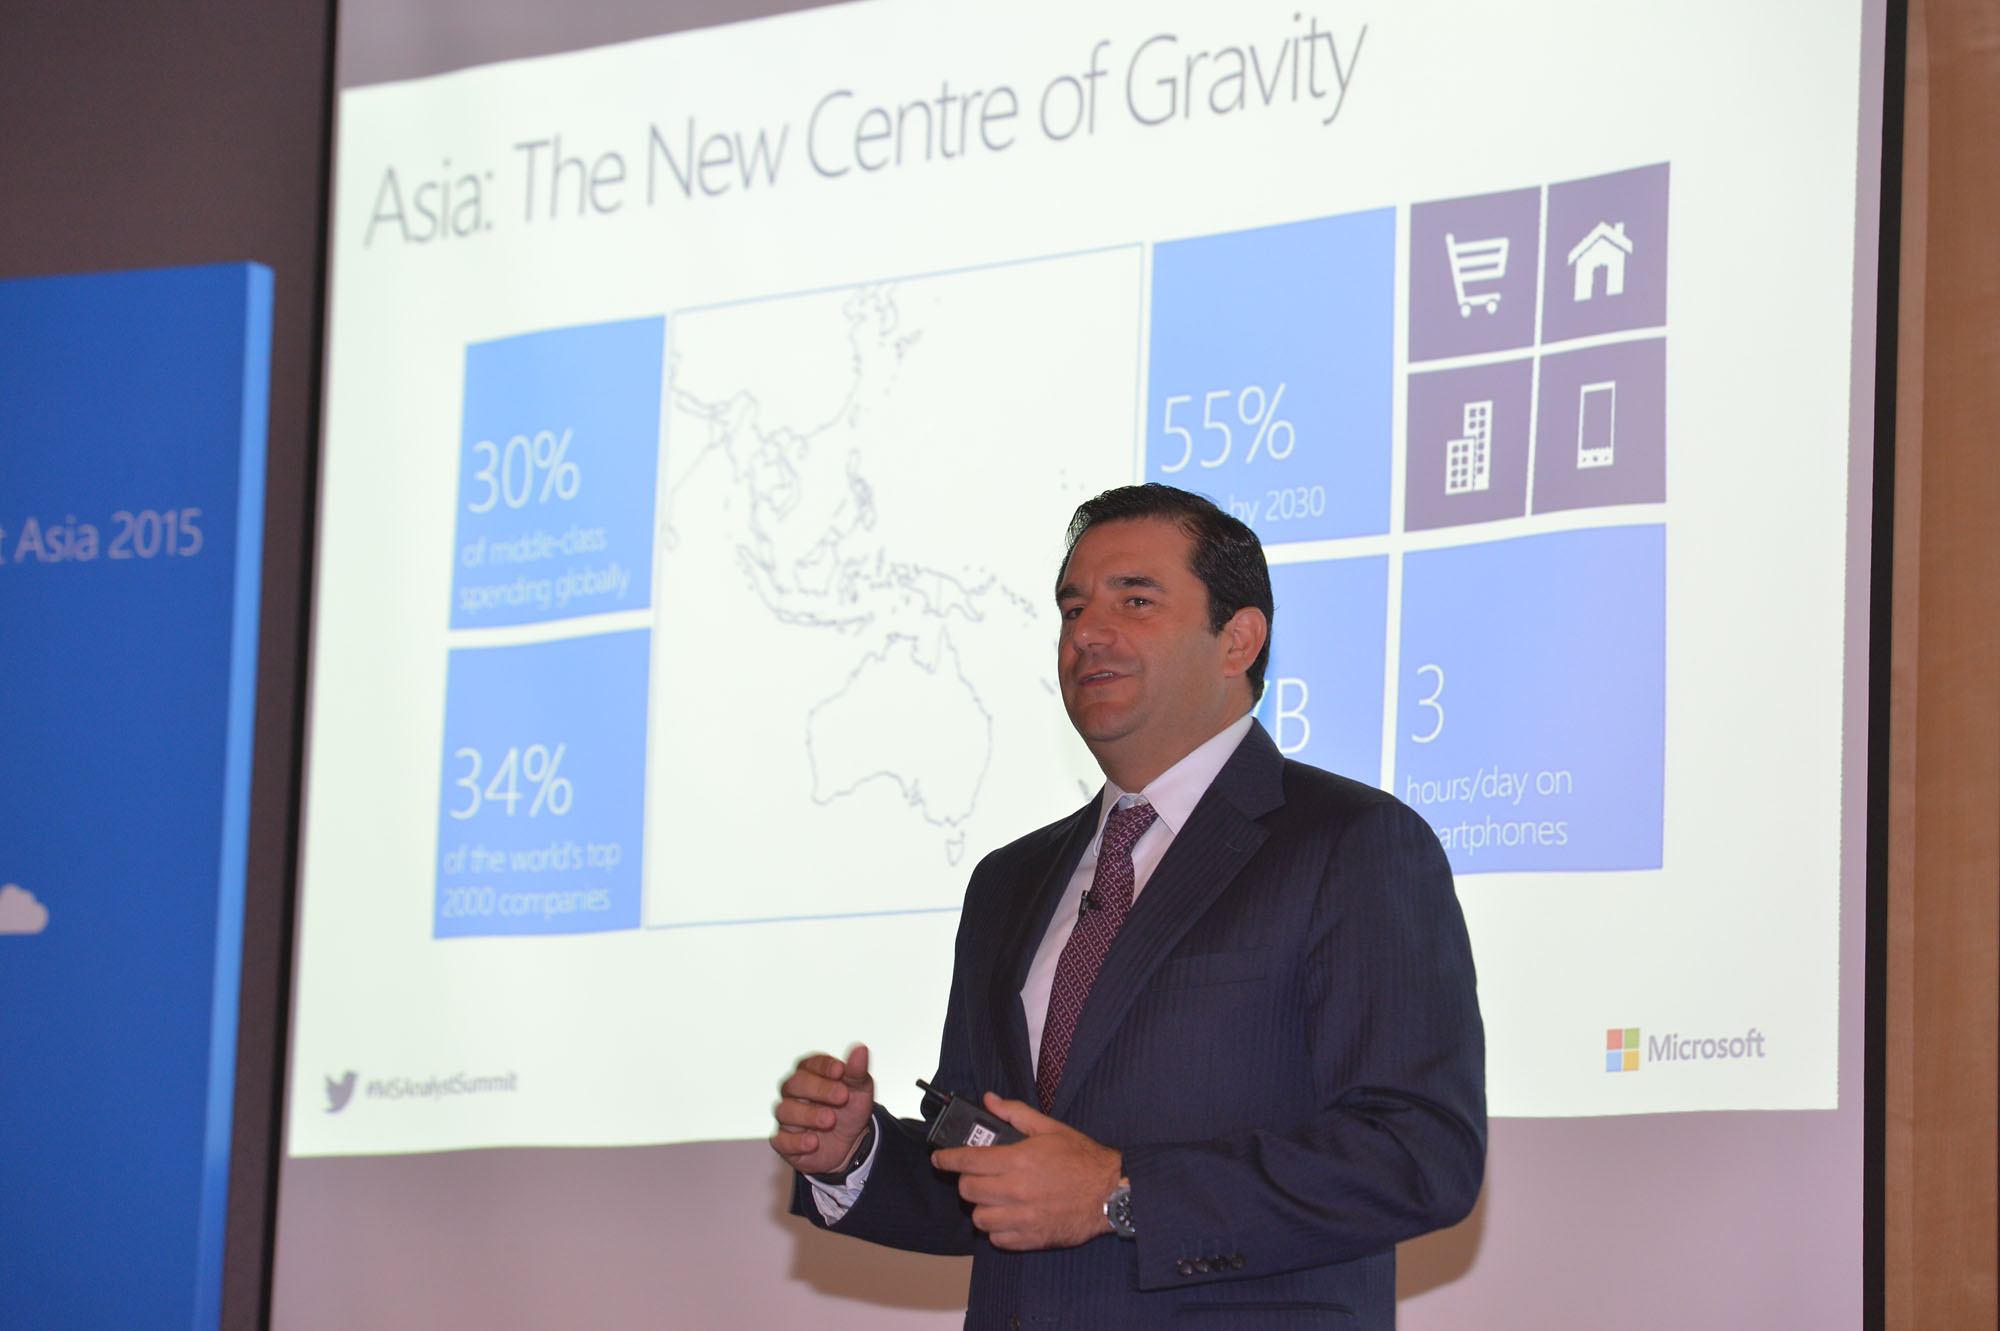 Asia is now the new centre of gravity, Cernuda says.